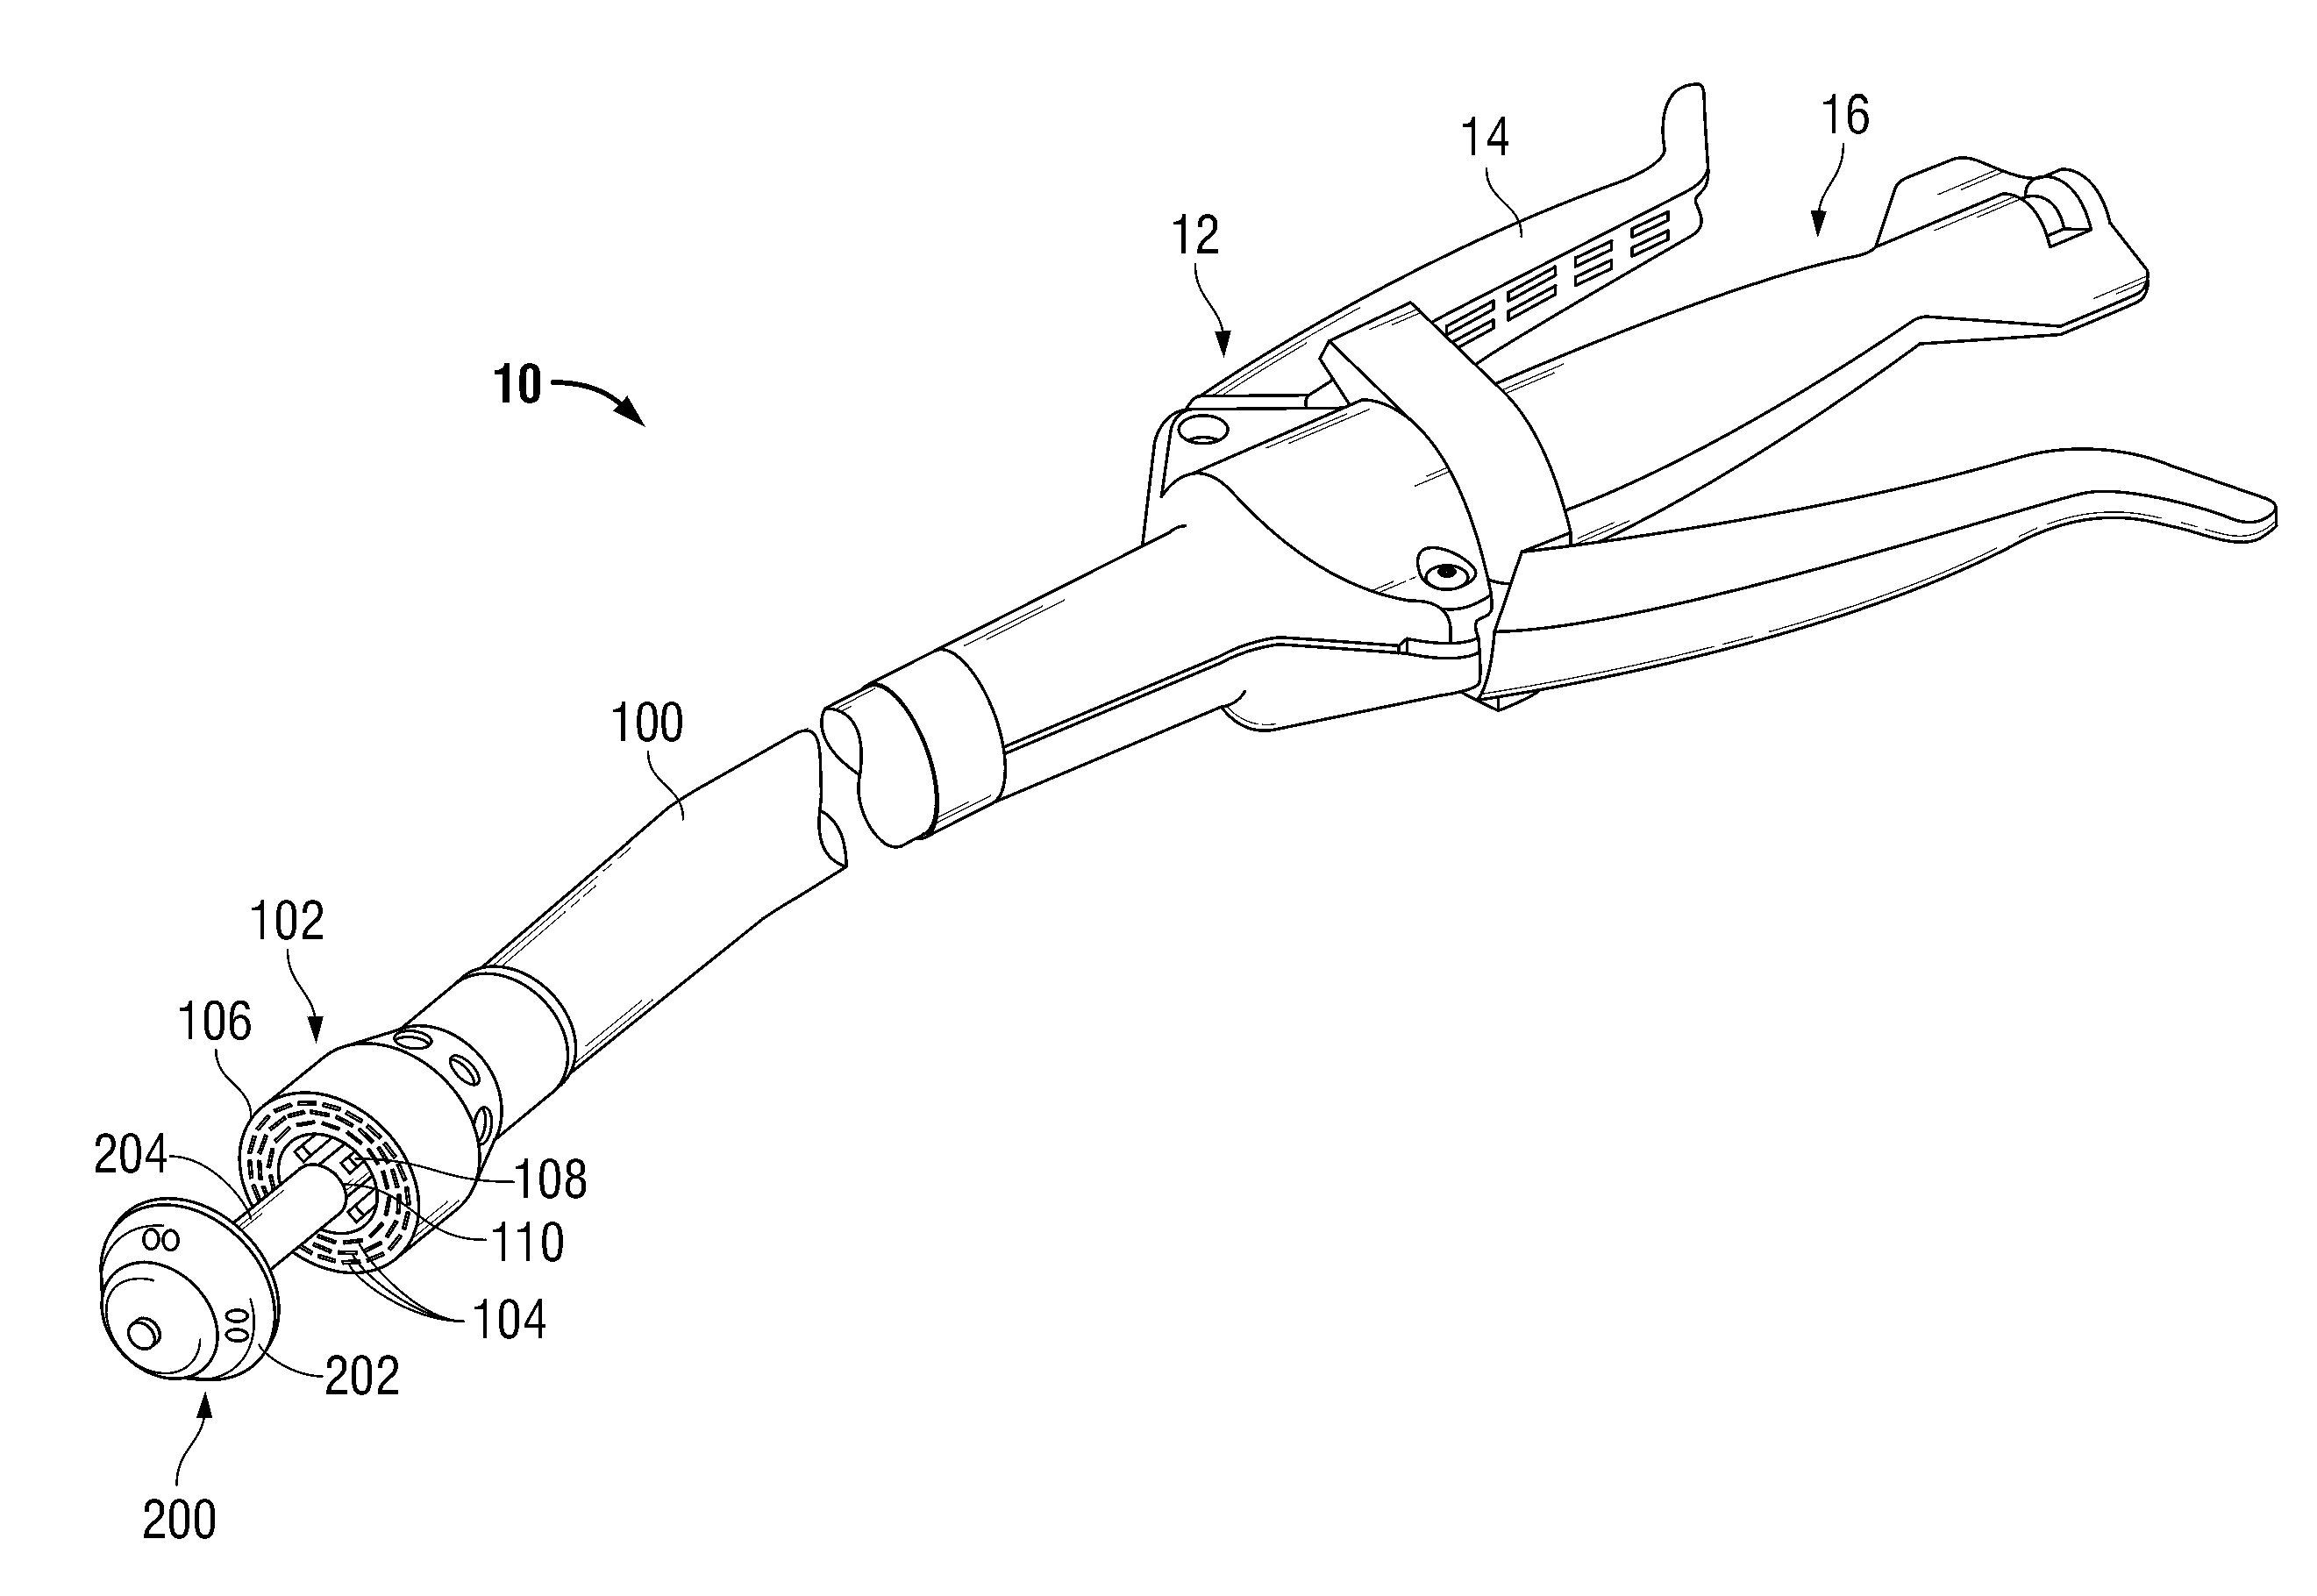 Surgical device including buttress material